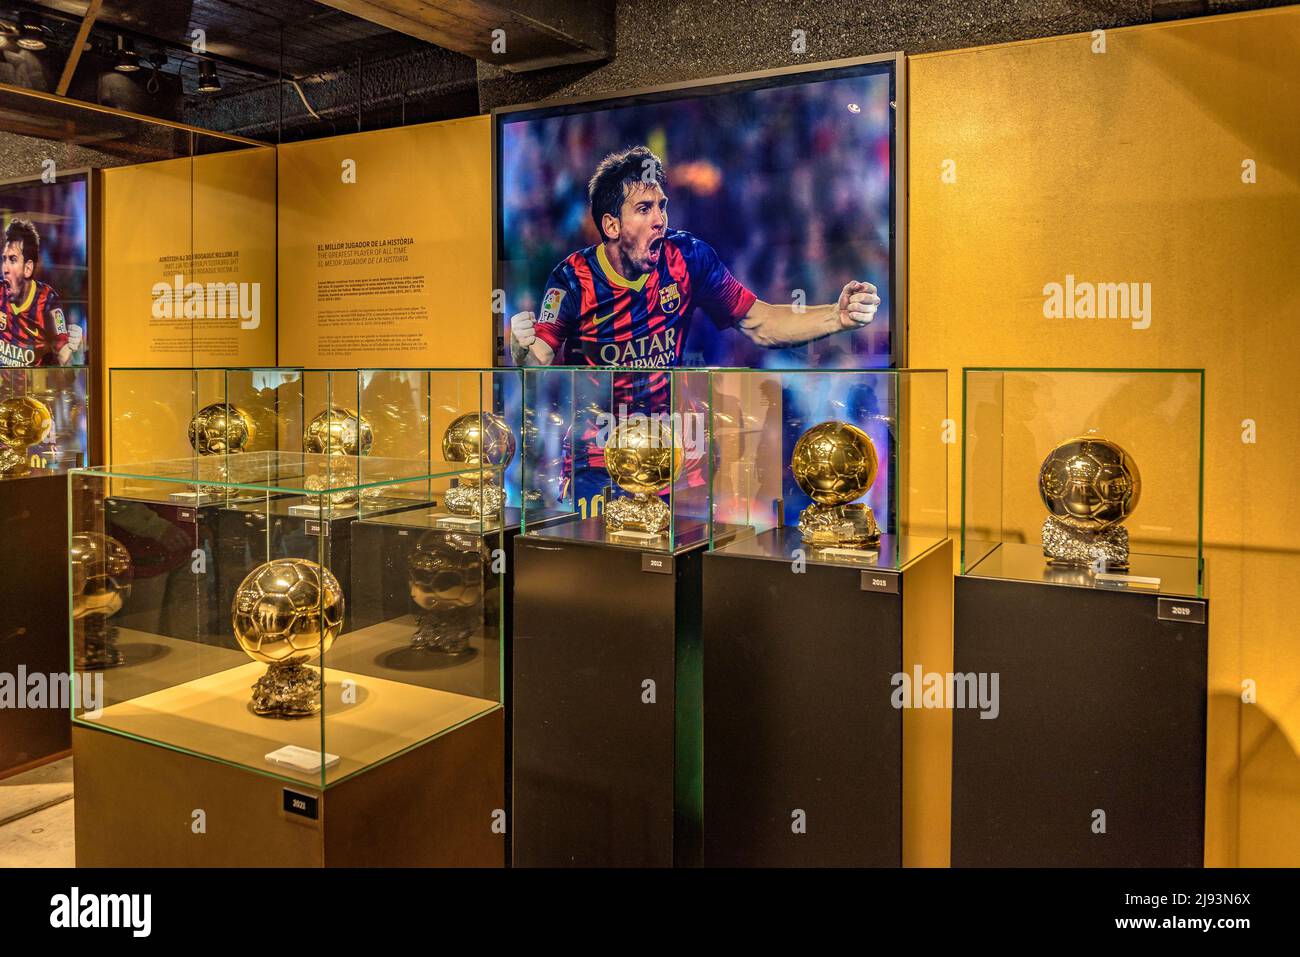 Golden Ball to the best player in the world given to Leo Messi and exhibited in the Messi space of the FC Barcelona museum, at the Camp Nou, Barcelona Stock Photo